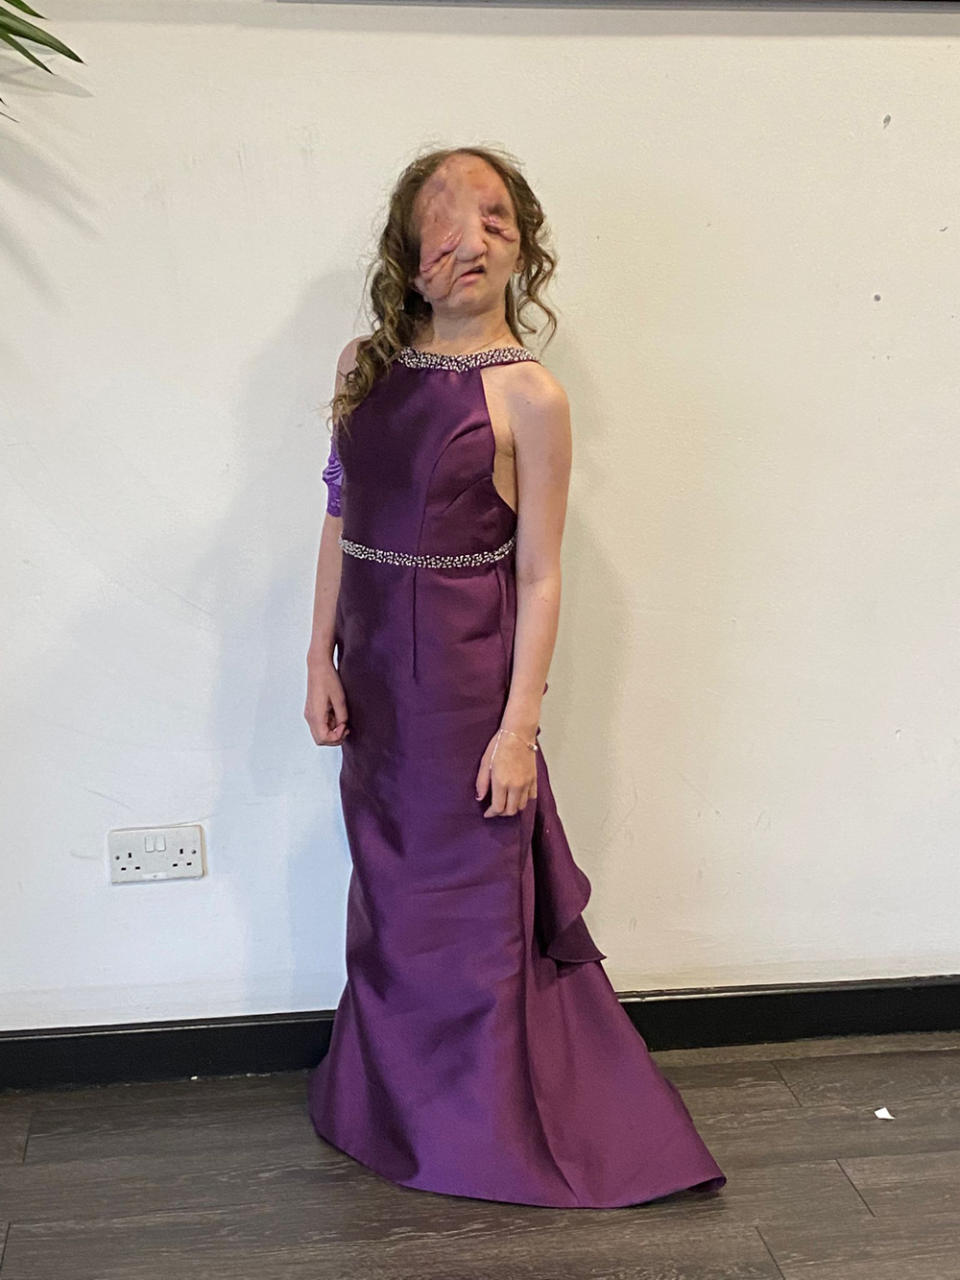 Lizzy in her purple prom dress before her end-of-year sixth form ball (Collect/PA Real Life)